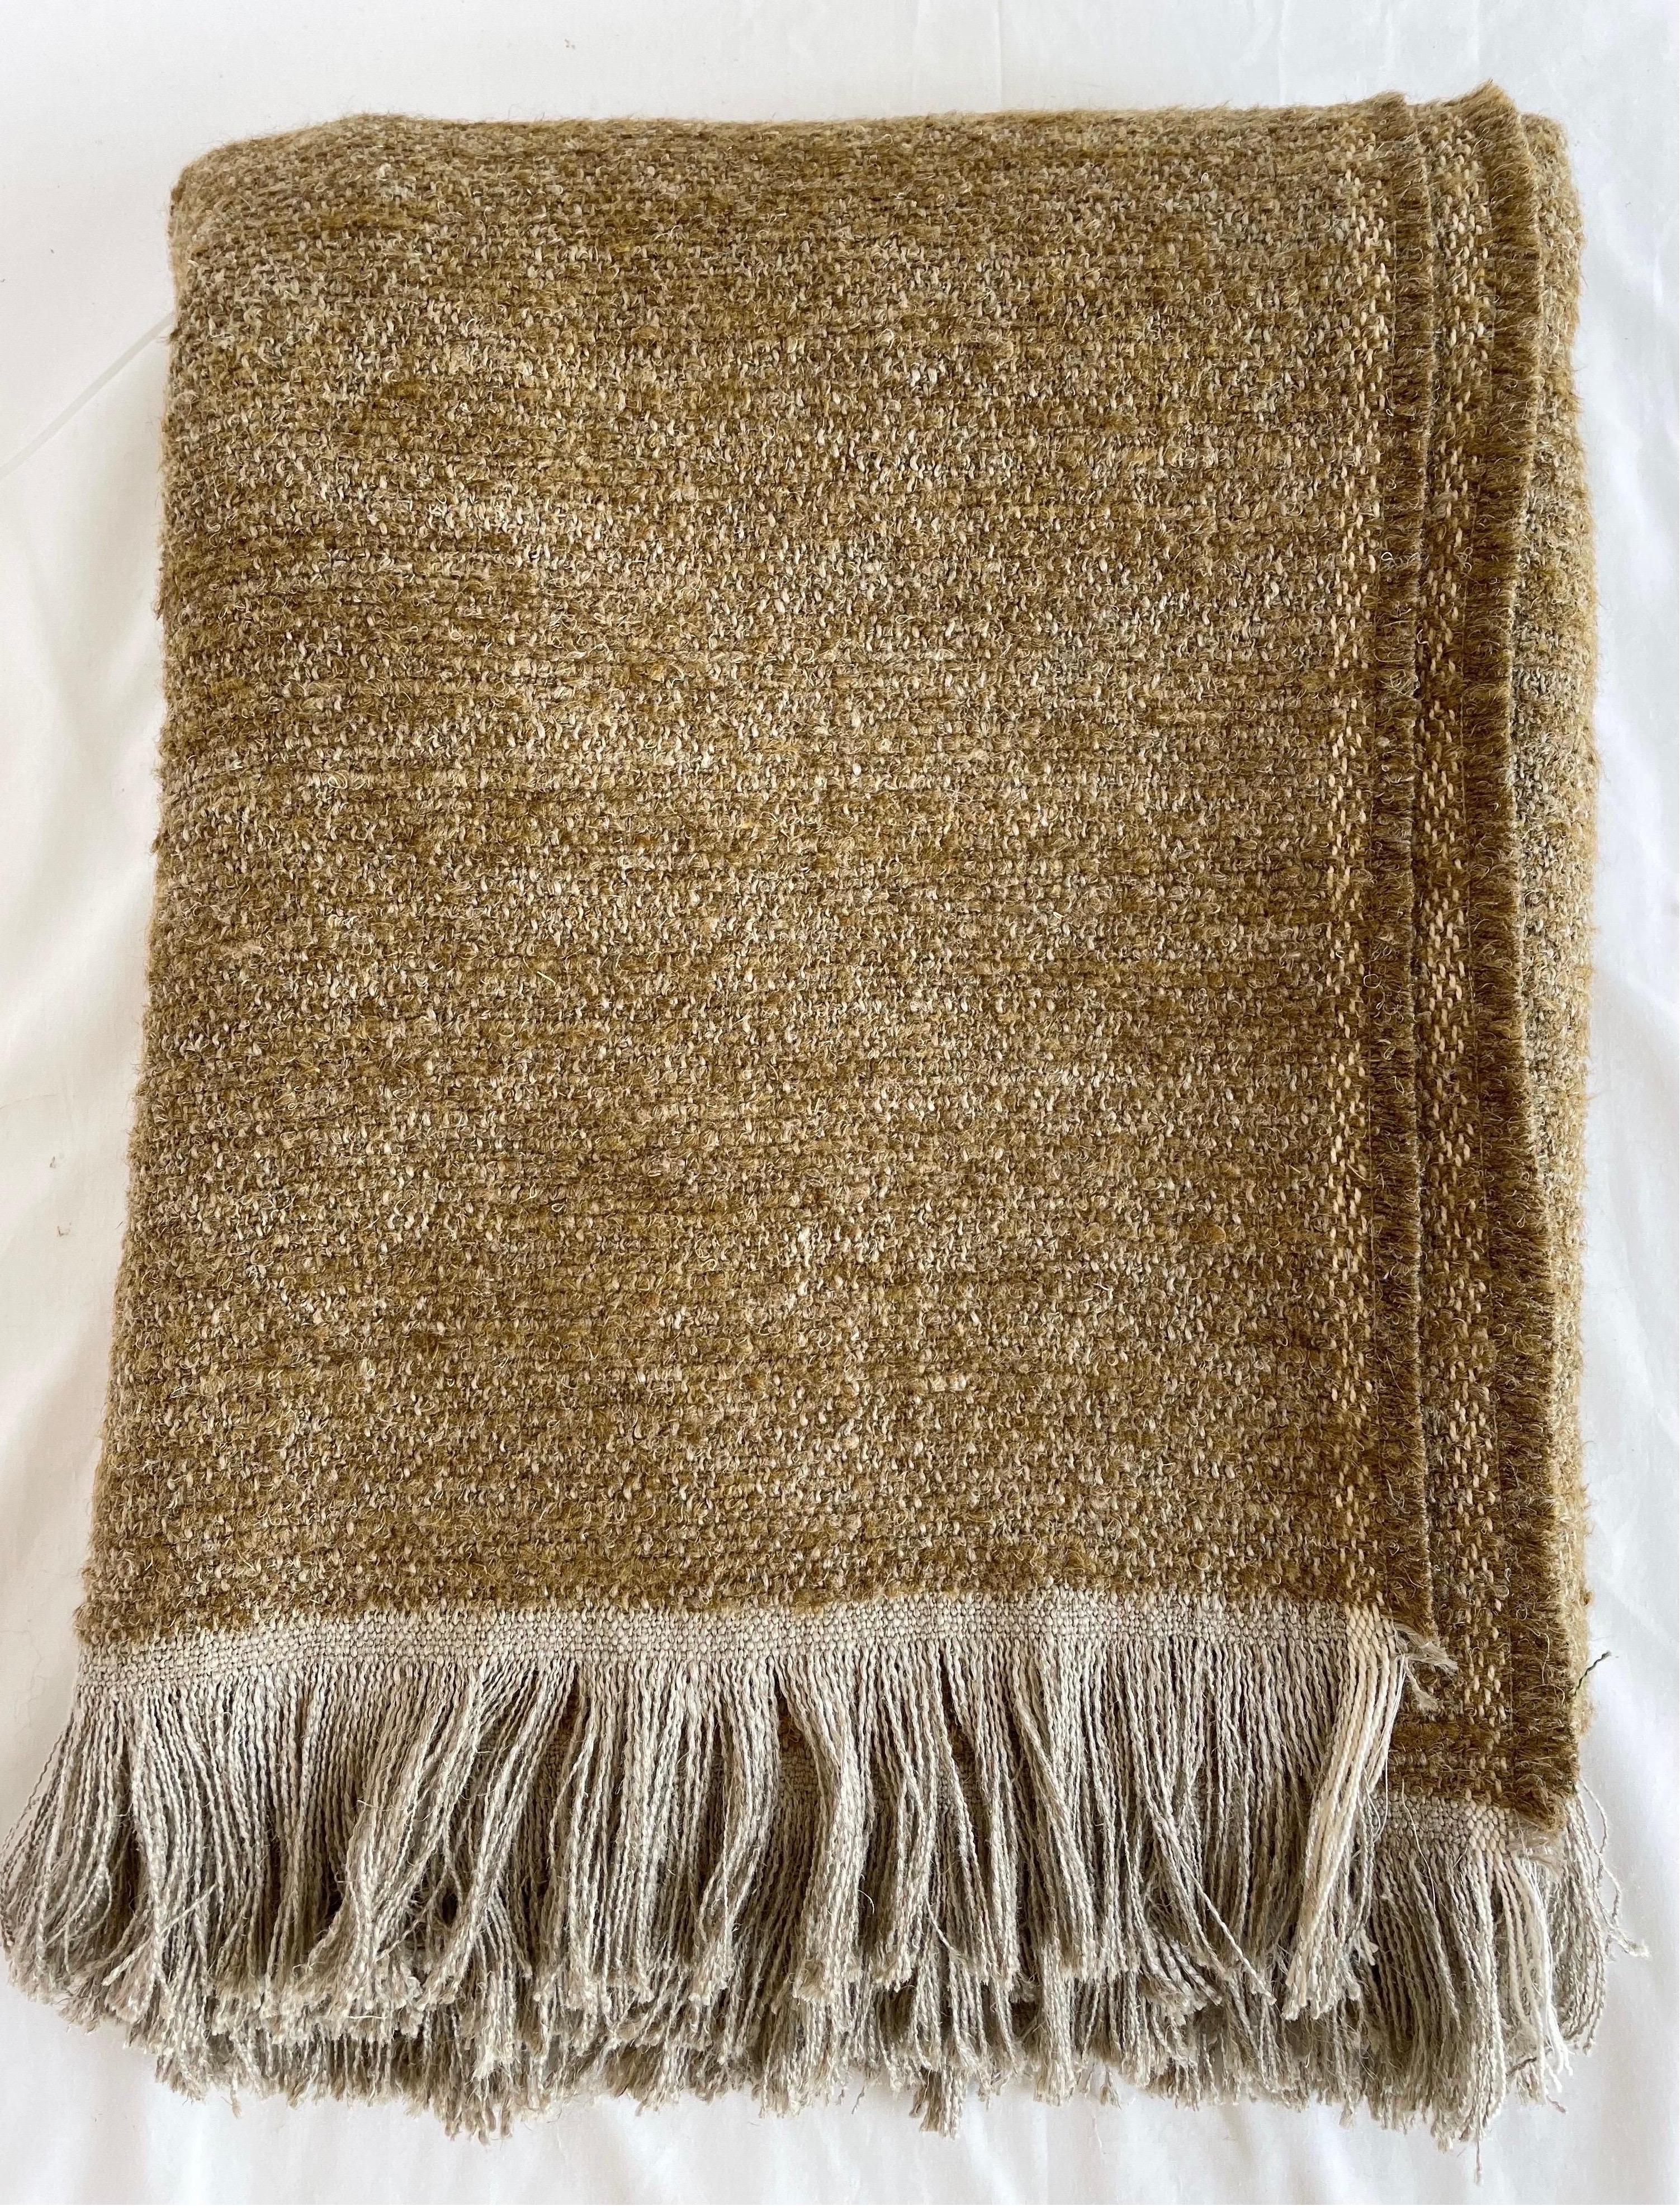 Woven in Belgium using traditional weaving techniques, Bloom Home Inc Nasha features a Belgian Linen warp and alternating Belgian Linen/Mixed Fiber weft. The alternating wefts create a subtle stripe that plays with both texture and color. If this